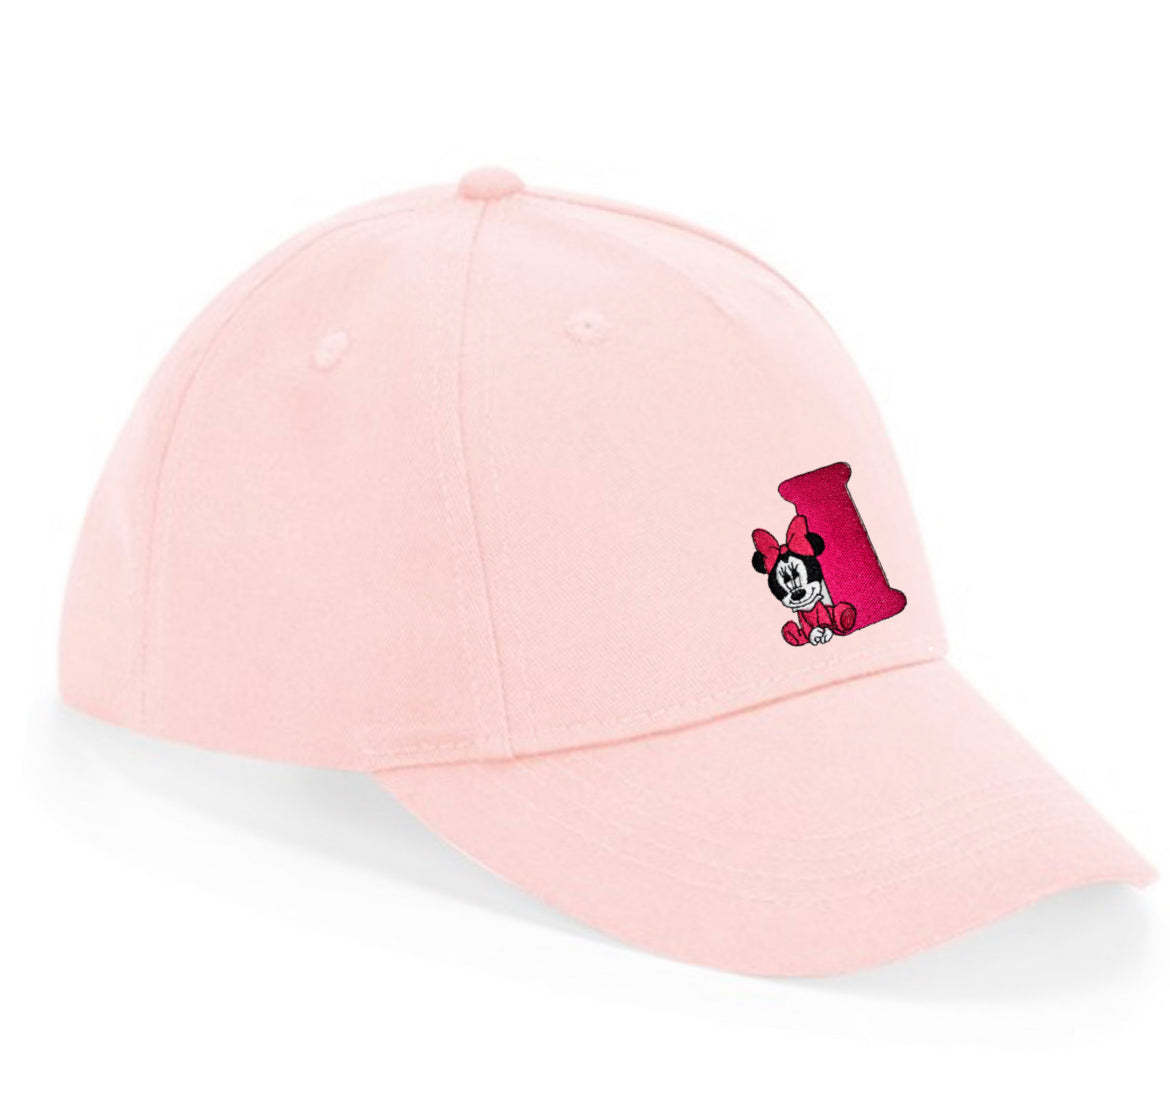 Disney Initial Baseball cap Available in Pink and Blue